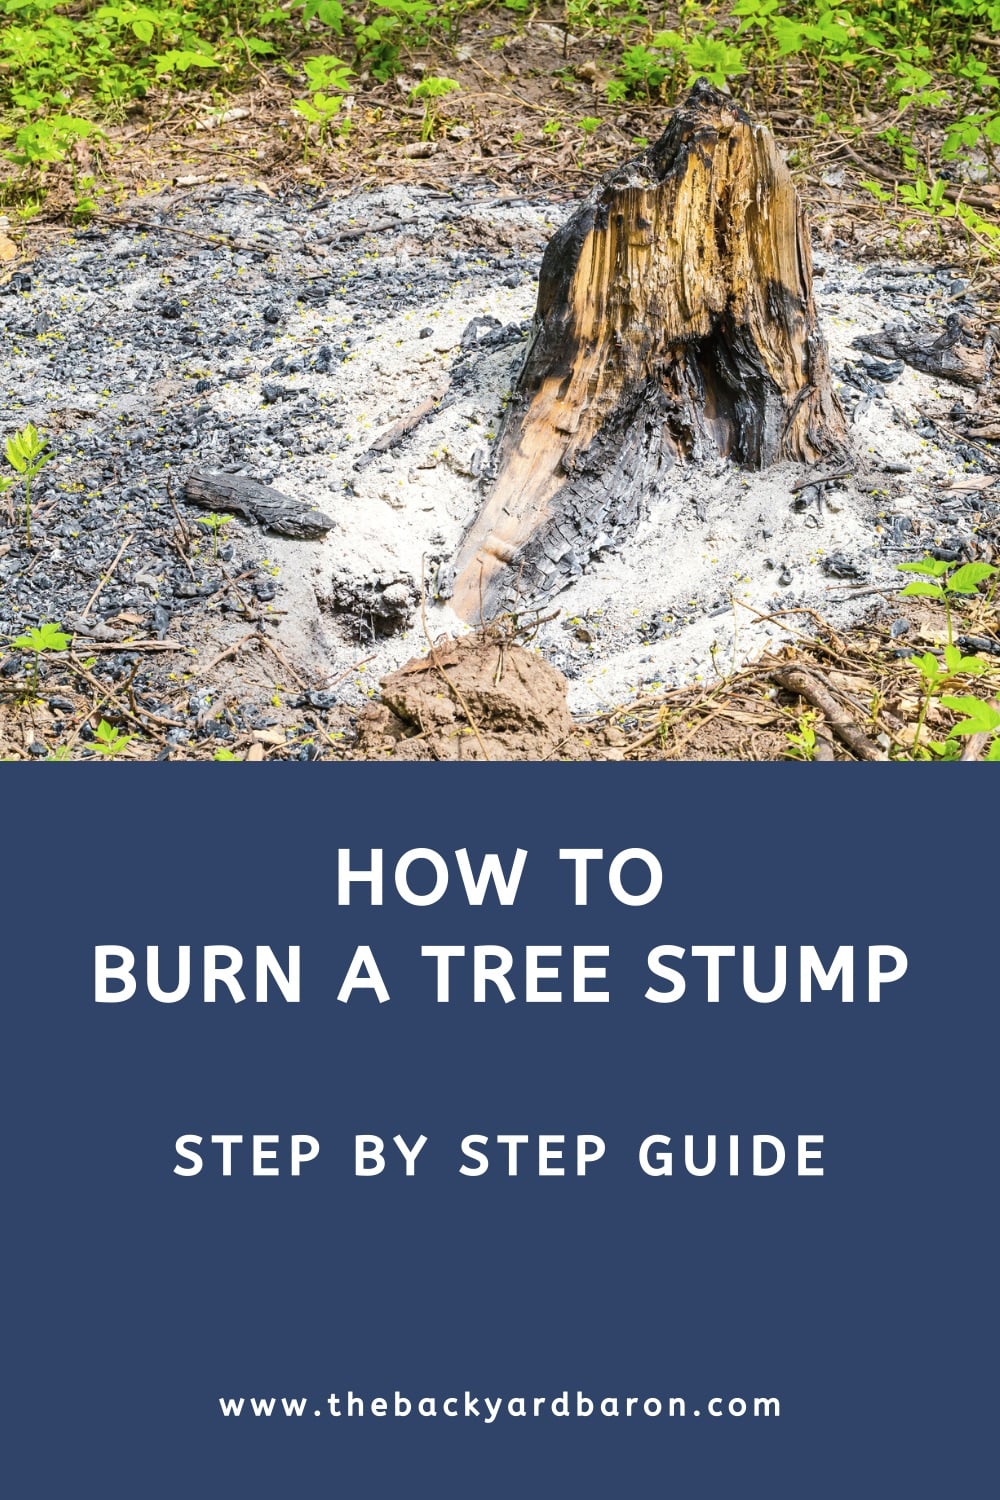 Guide to burning tree stumps